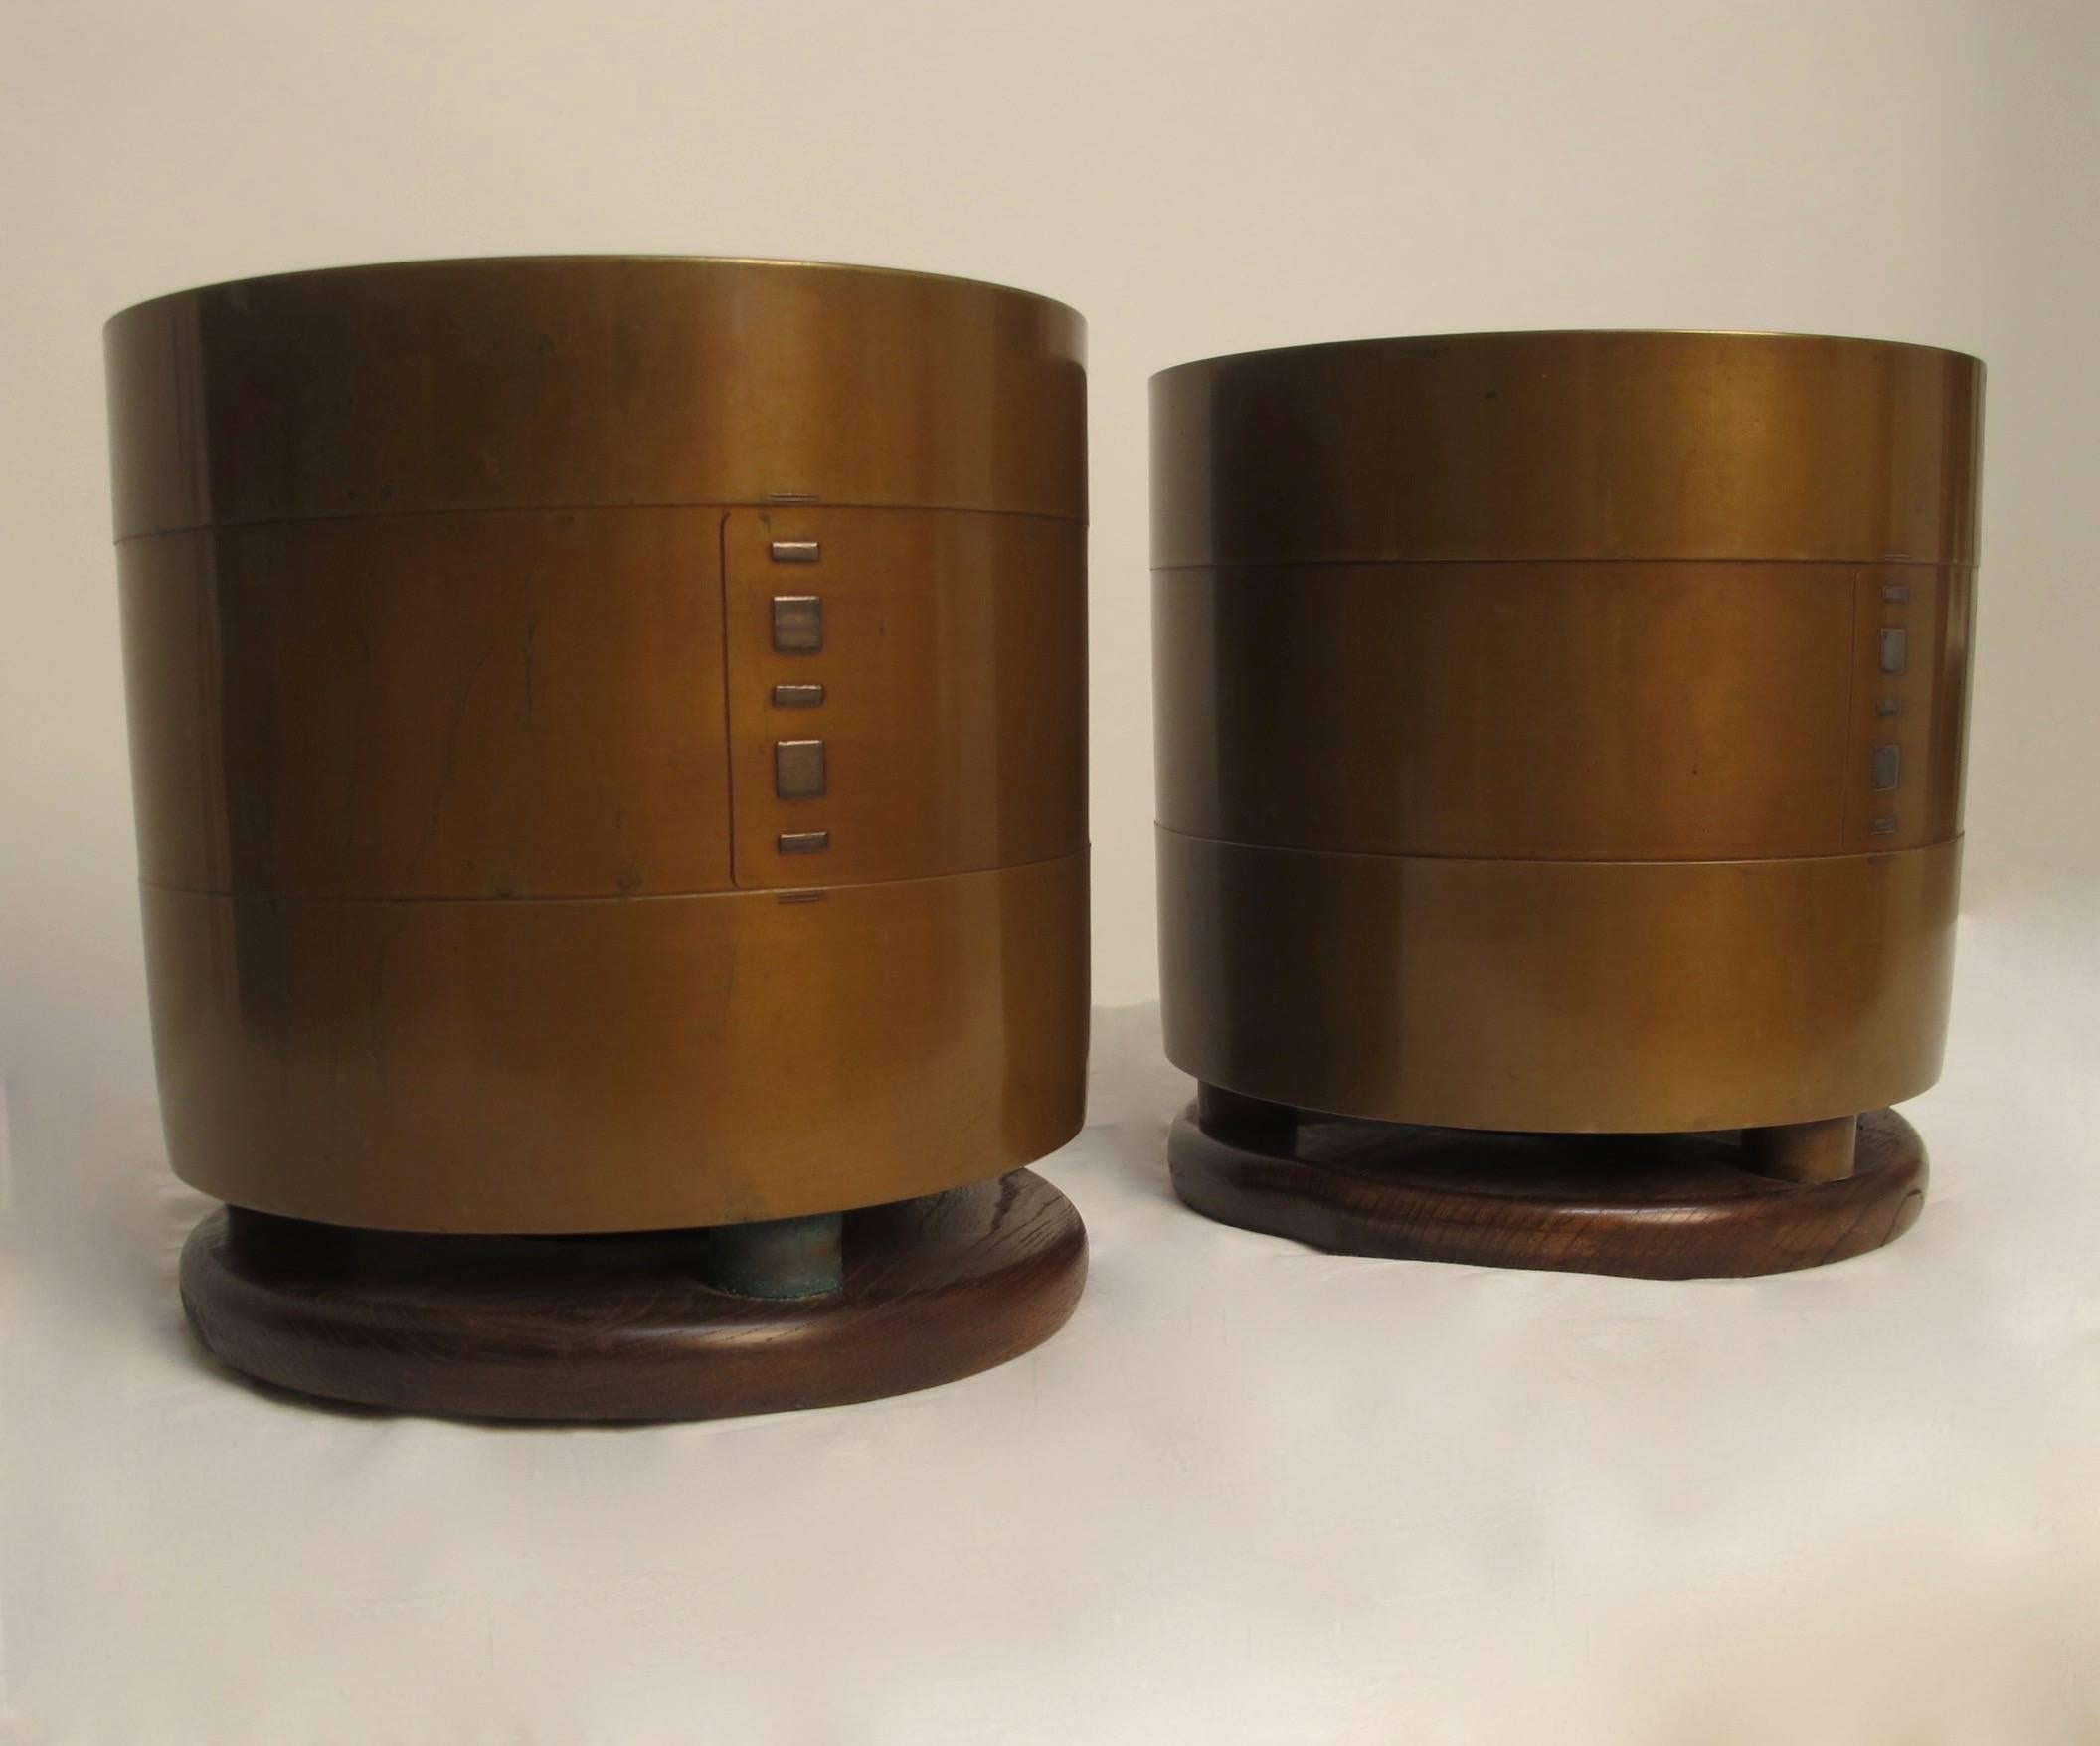 A superb pair of bronze planters with original box and cloth liners. Having silver inlay detail on the bronze, the urns are affixed to Kiri Wood bases. Reputedly from the collection of John Traina. Black lacquer stand included. Japan, early Showa